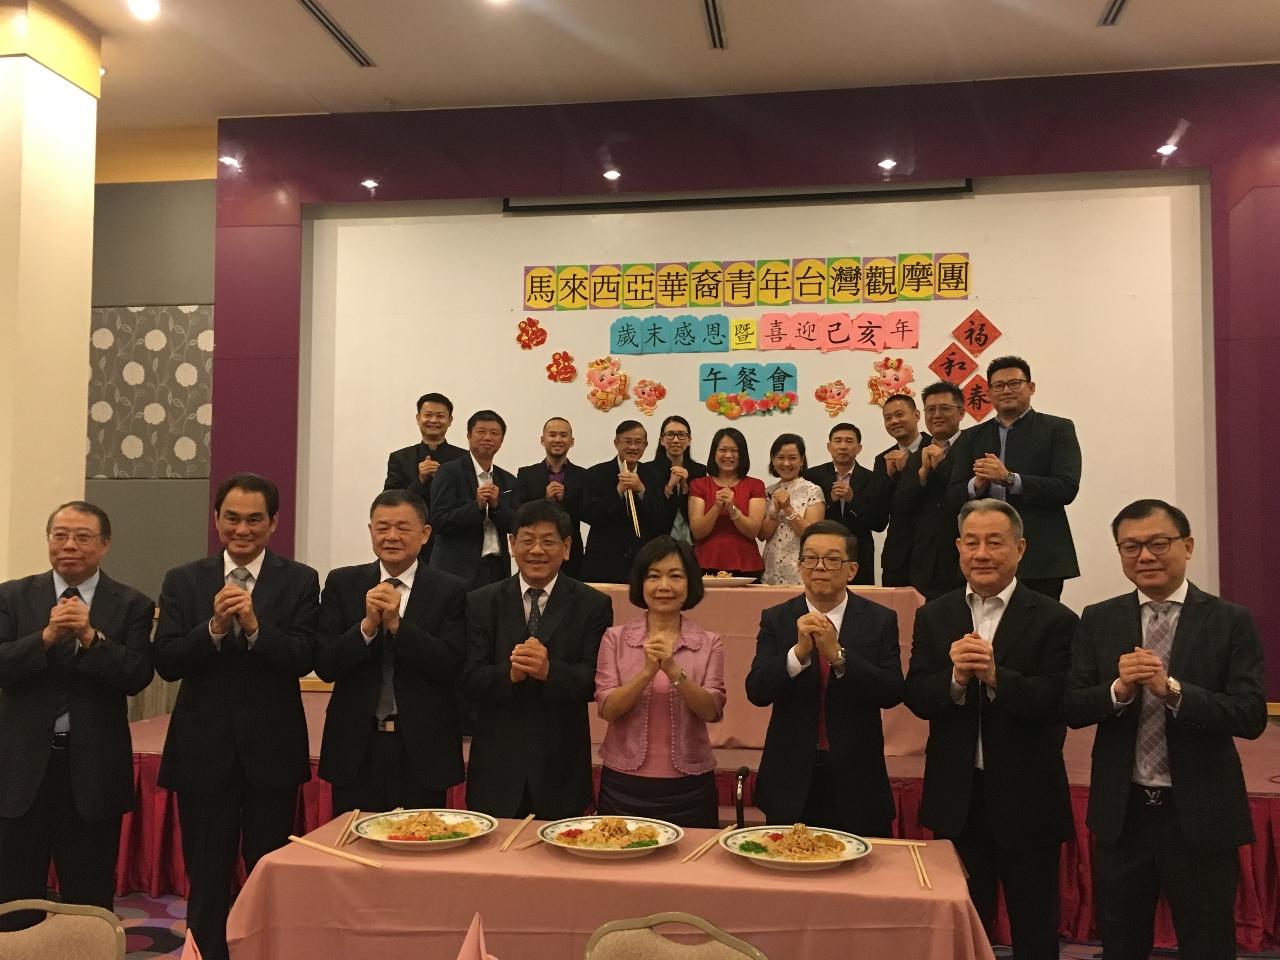 Representative Anne Hung (fourth from right) attends Malaysia Youth Study Tour to Taiwan (Guan Moo Tuan) Thanksgiving Luncheon for celebrating the Chinese New Year.